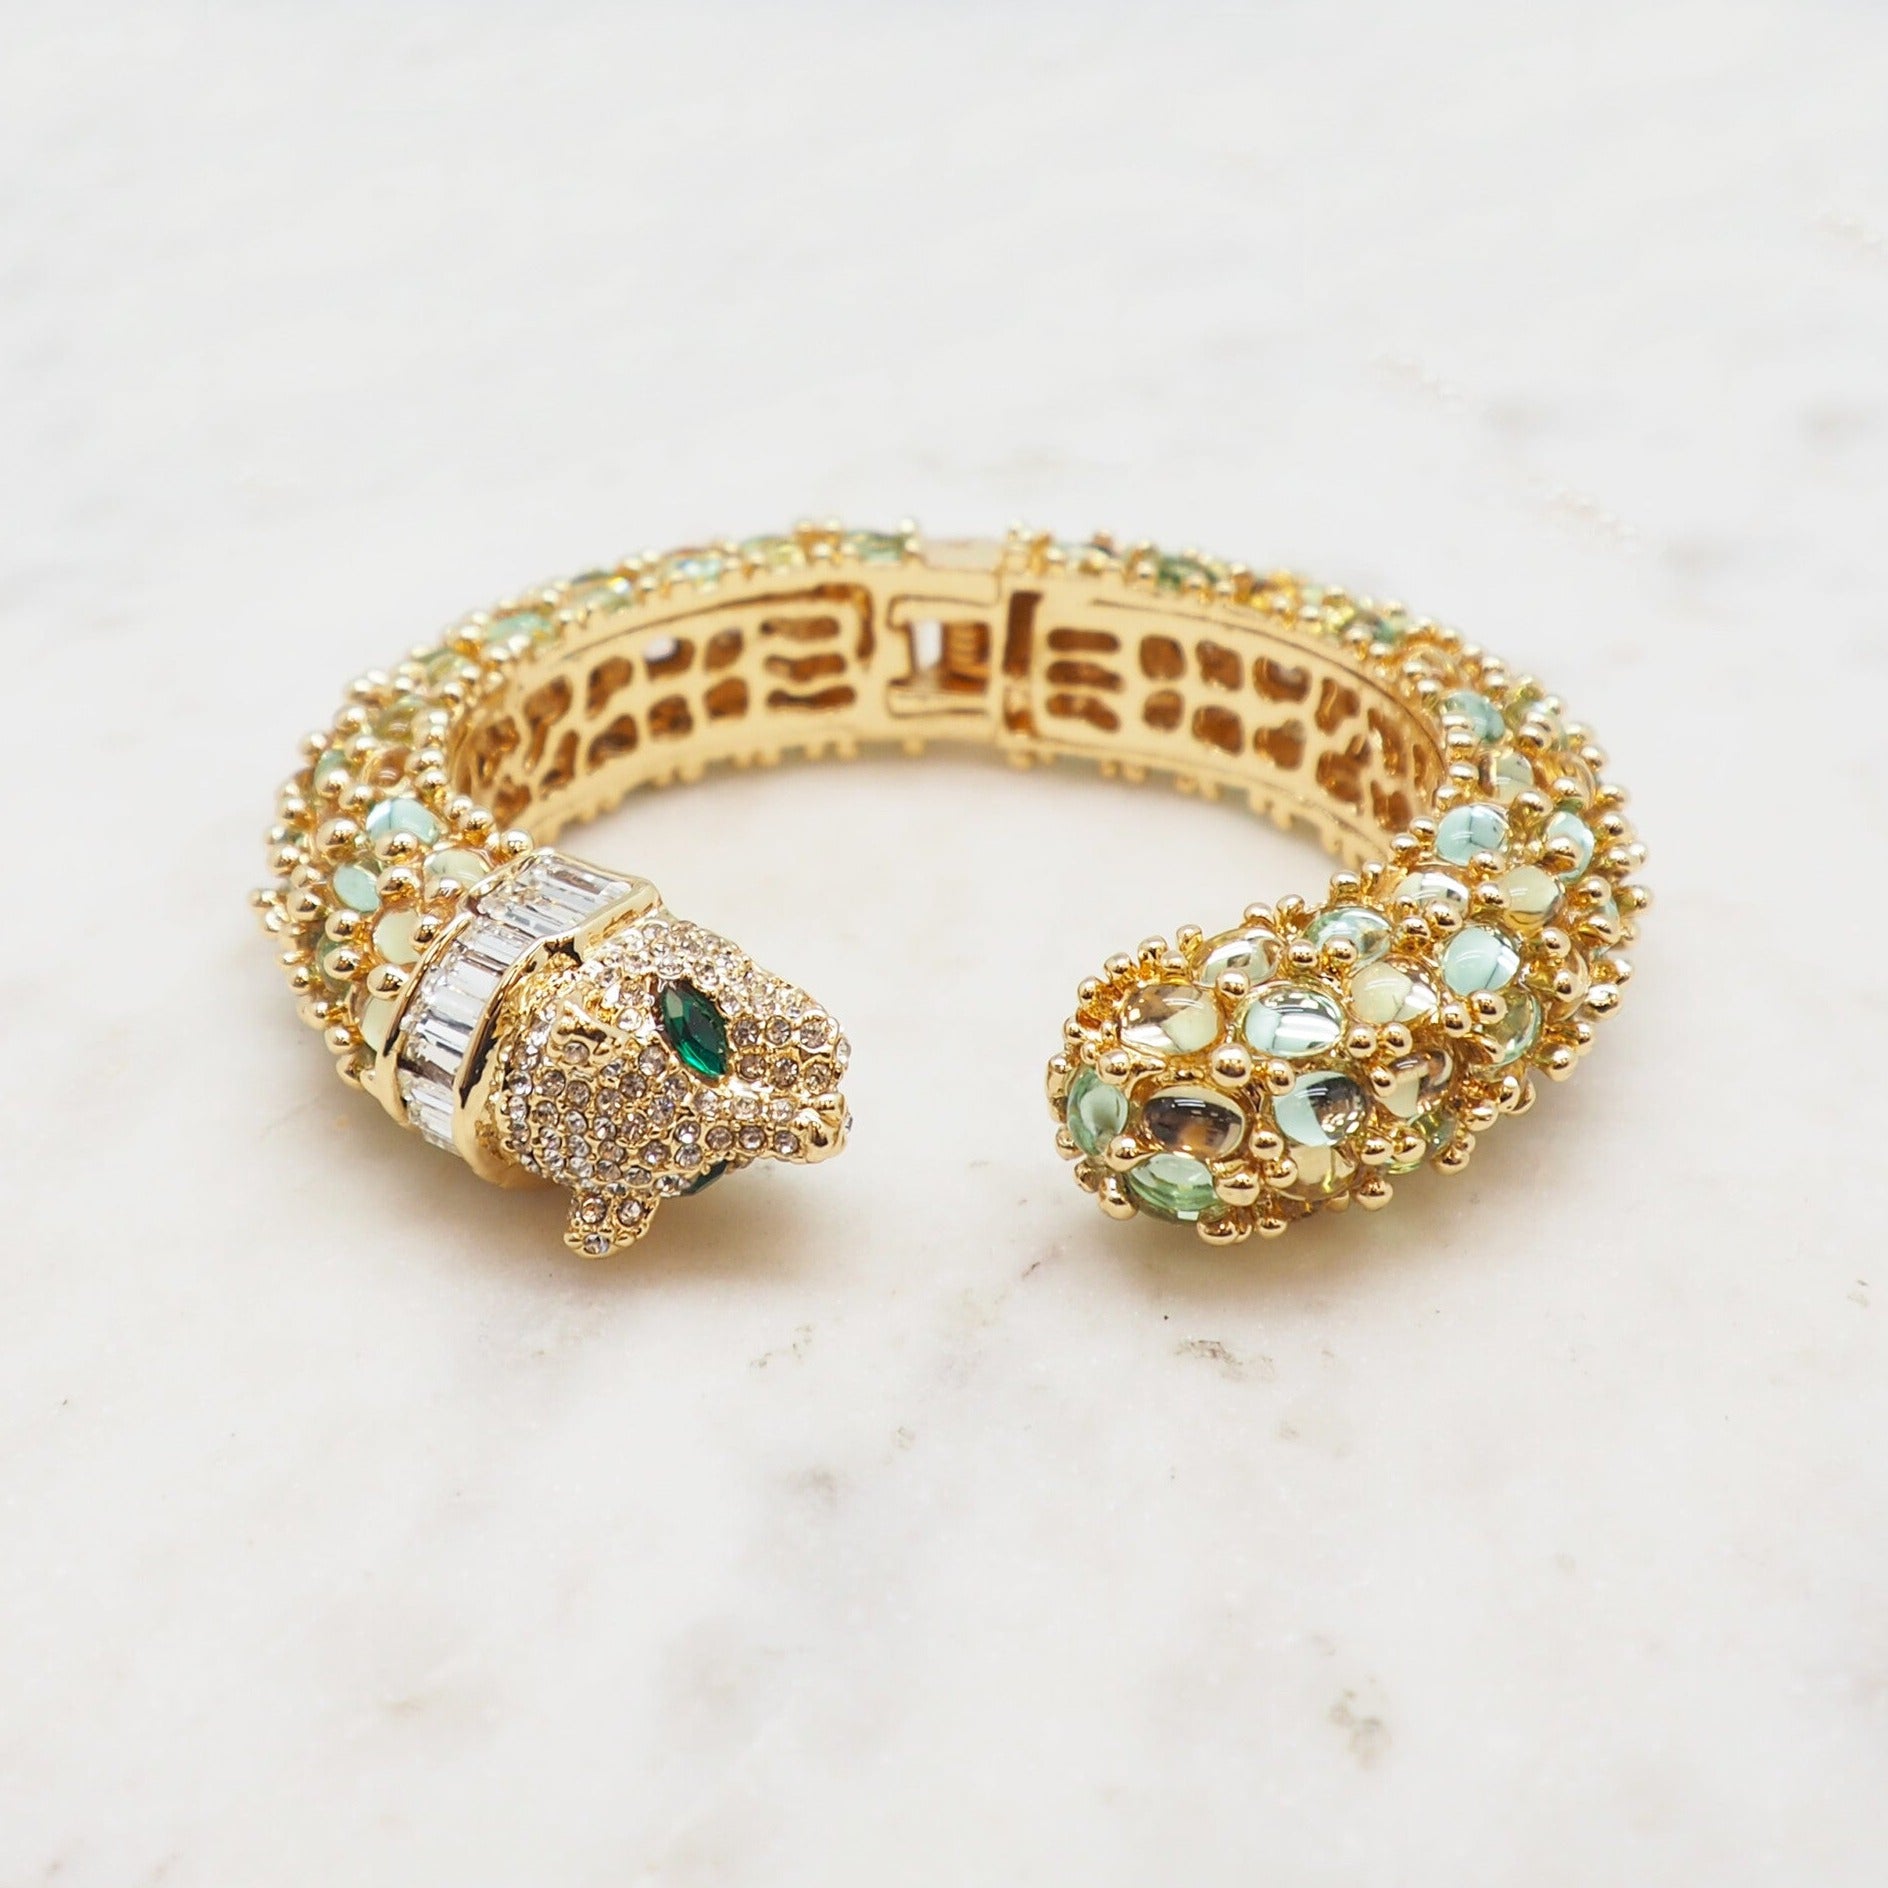 The Tiger Bangle - Green and Gold